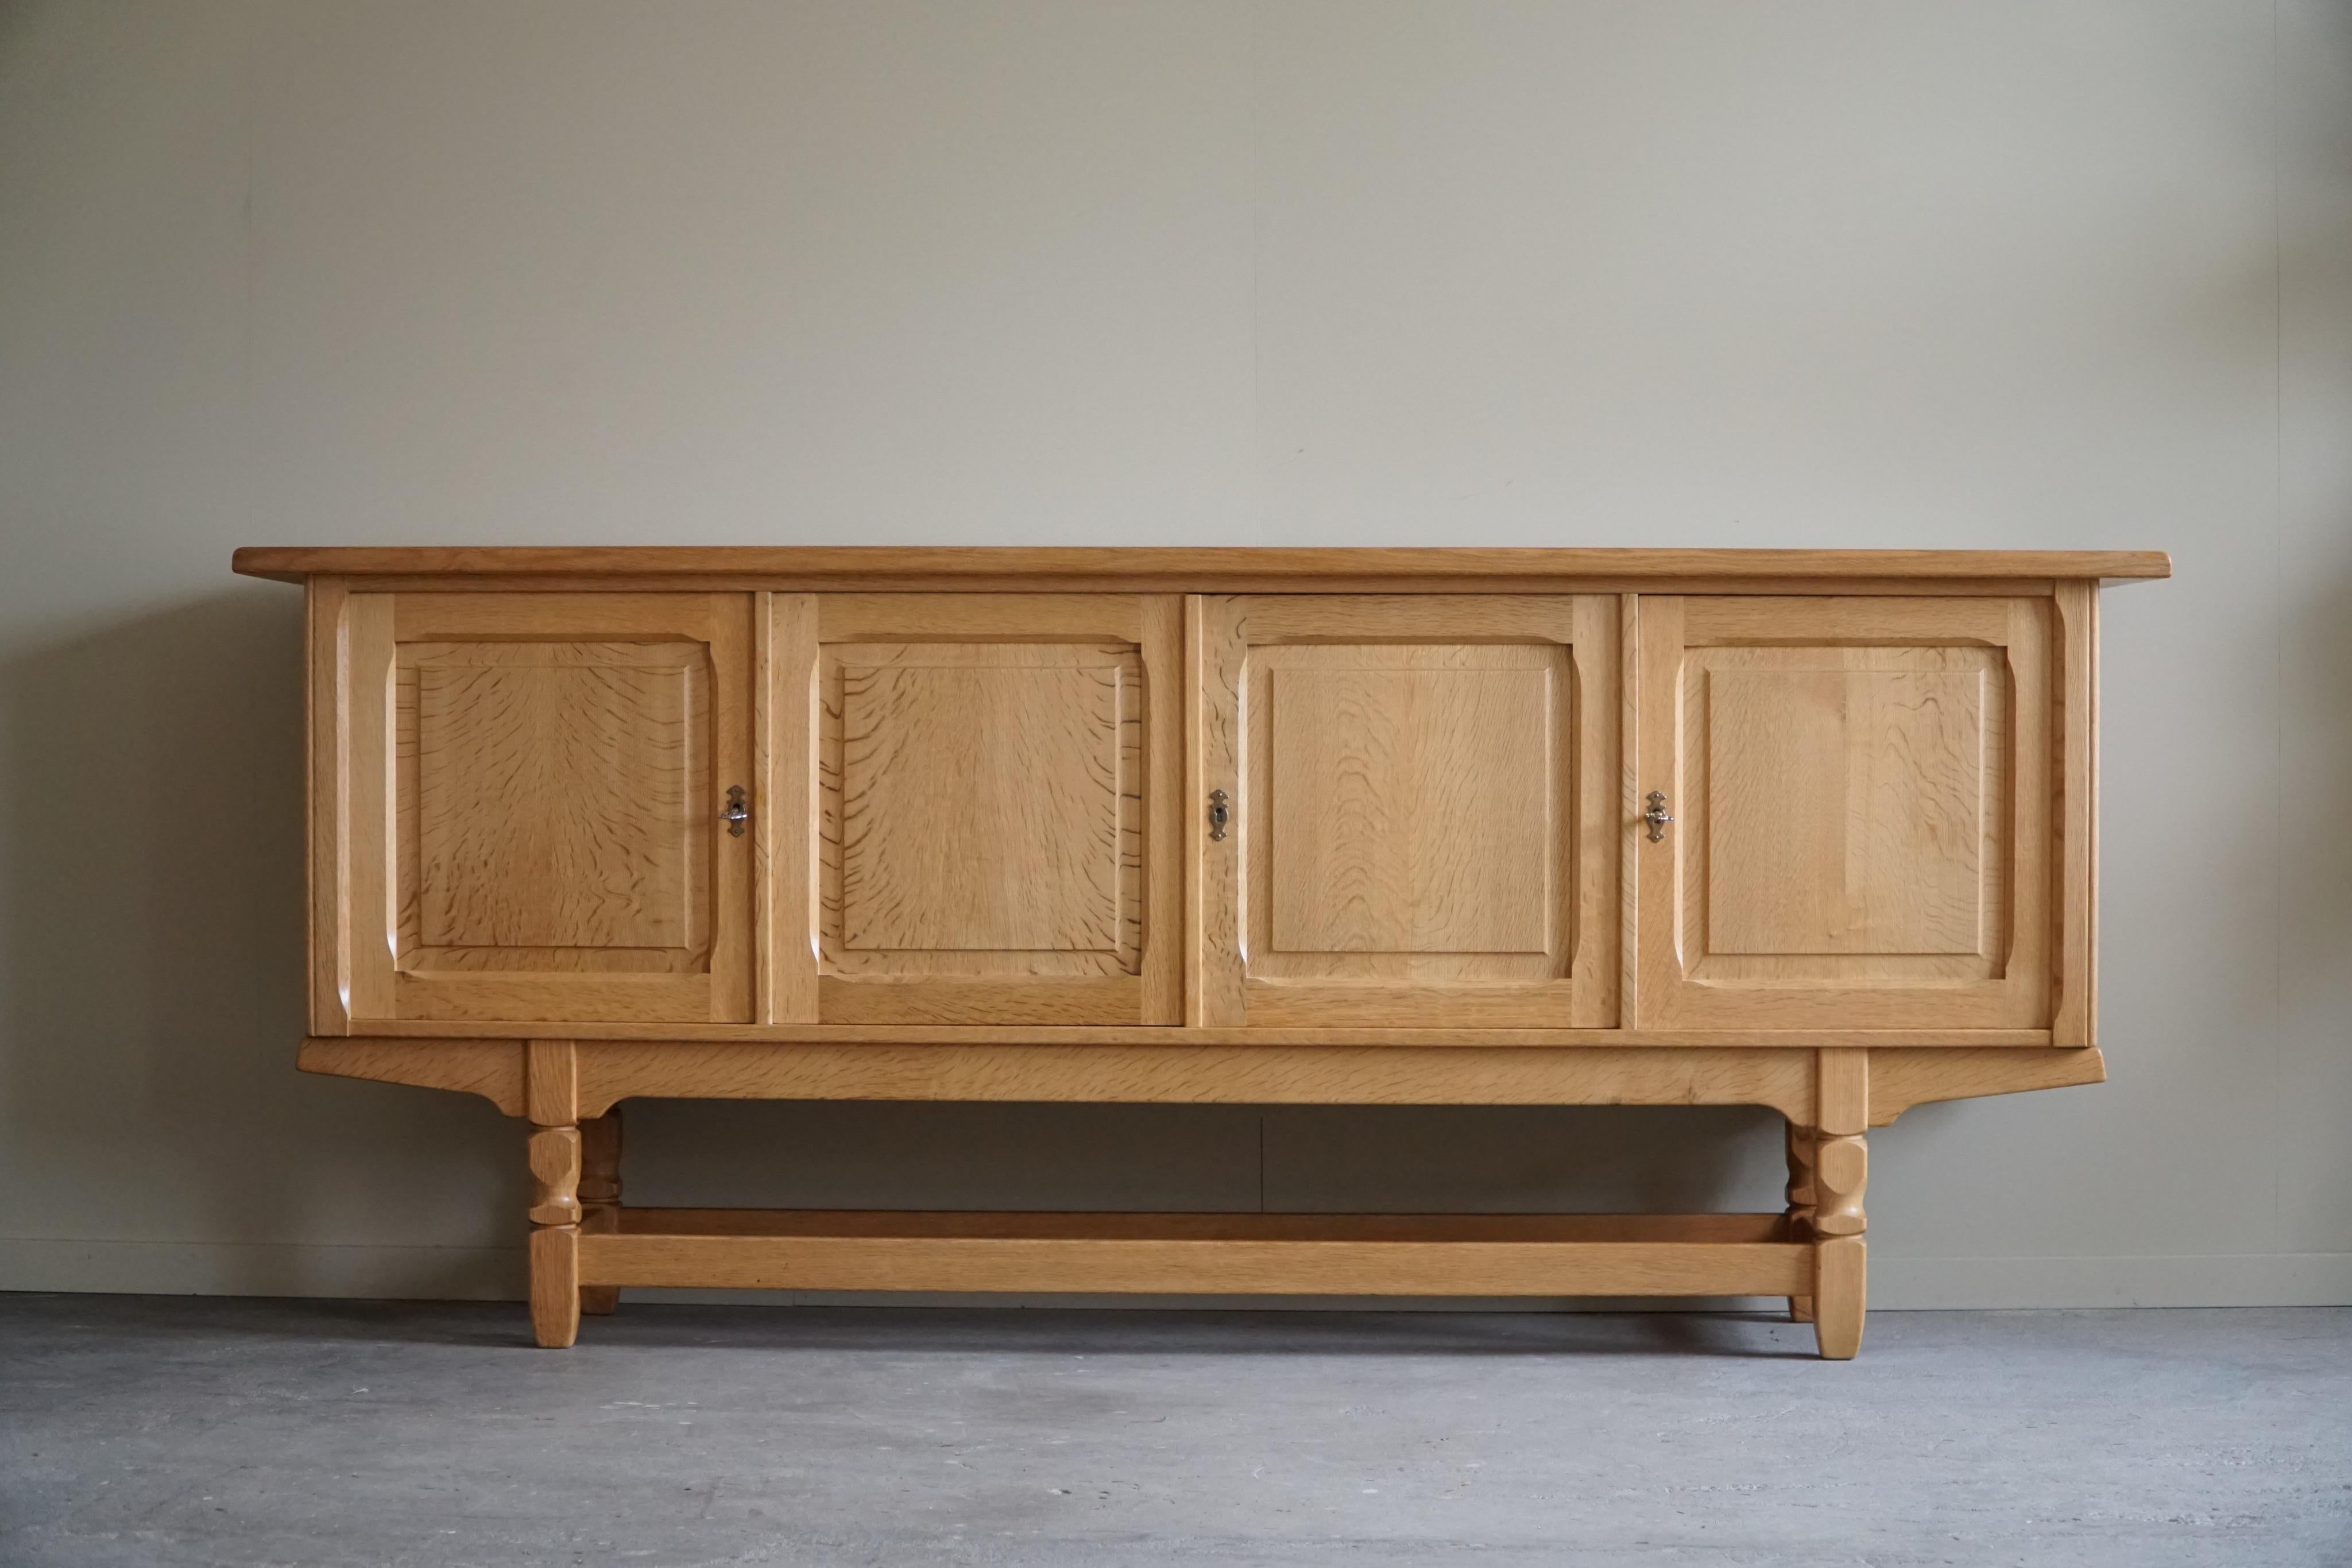 Beautiful low classic sideboard / cabinet in solid oak with plenty of storage space. Made by a Danish cabinetmaker in the 1960s. This piece is in a great vintage condition, with few signs of wear.

This brutalist object will fit into many interior